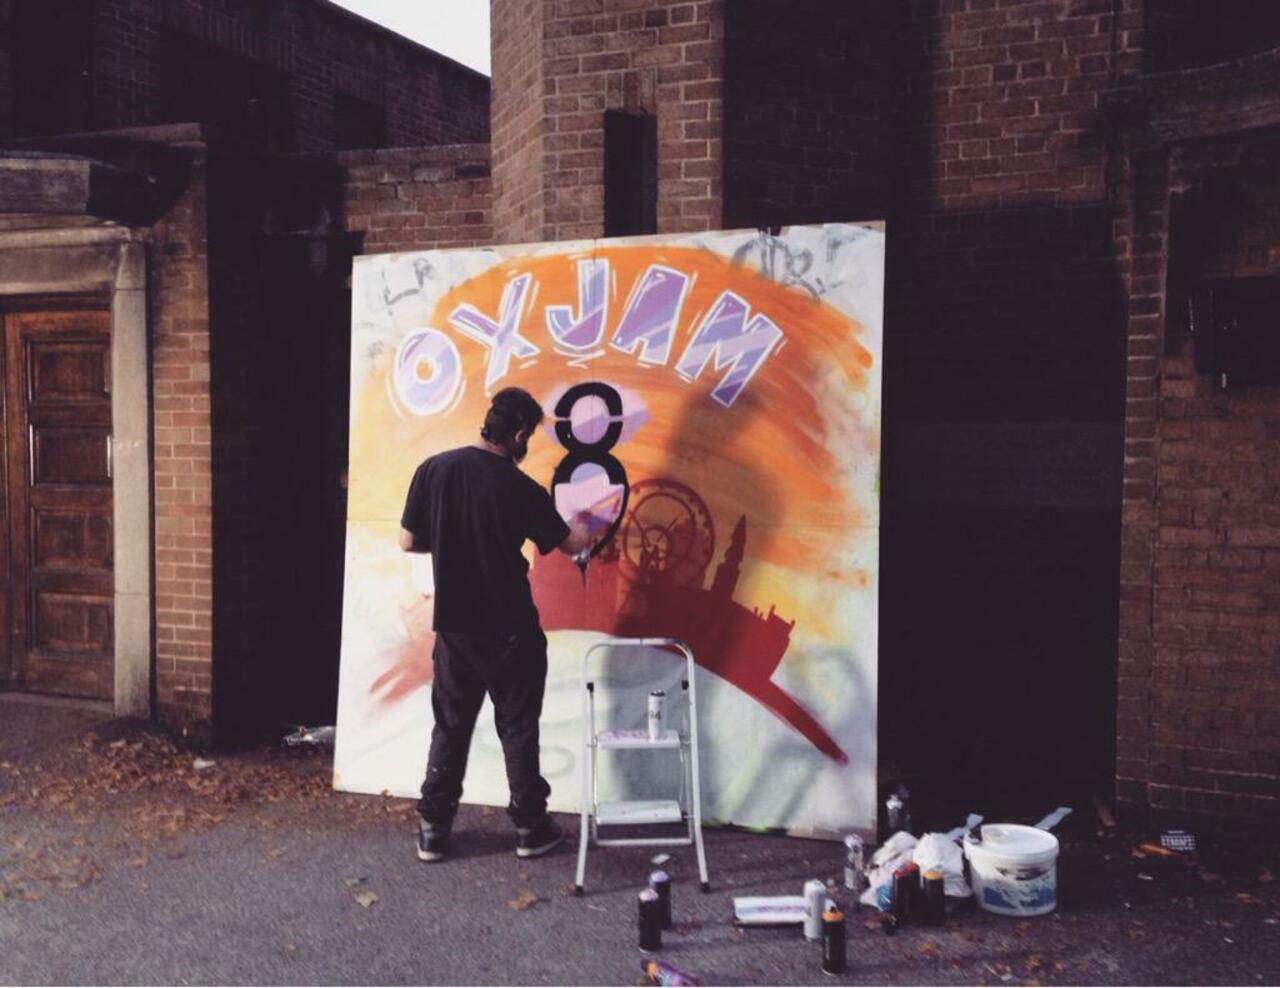 Can you guess what it is yet? Pij is hard at work on his #graffiti piece for #OxjamMCR! #streetart #Chorlton http://t.co/lwqqKuEytg